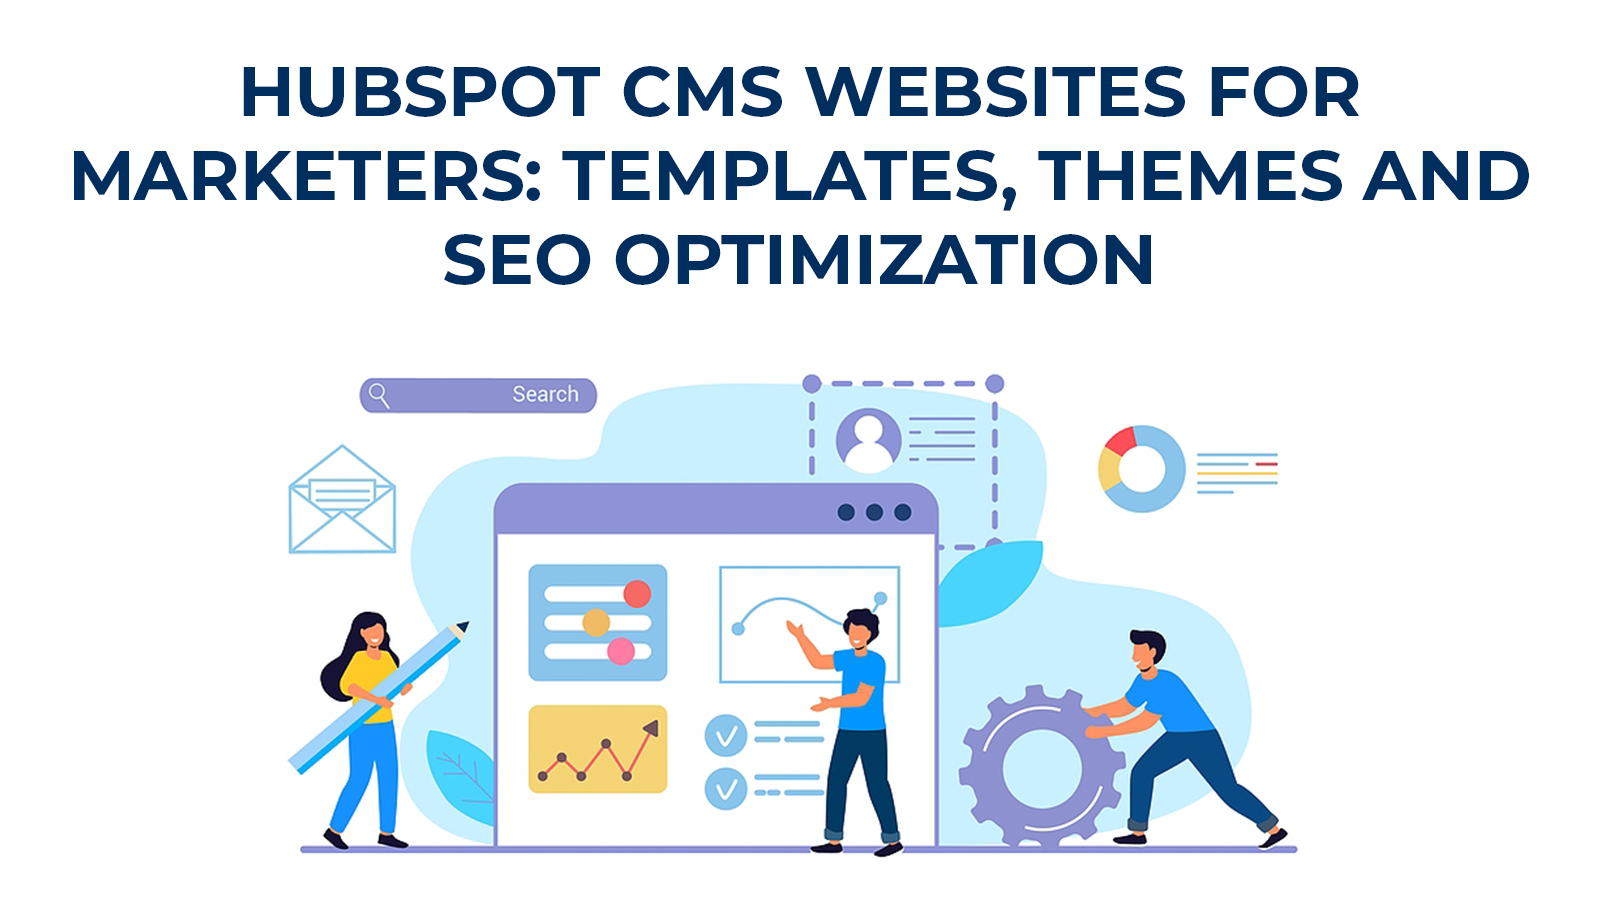 HubSpot CMS Websites for Marketers: Templates, Themes and SEO Optimization